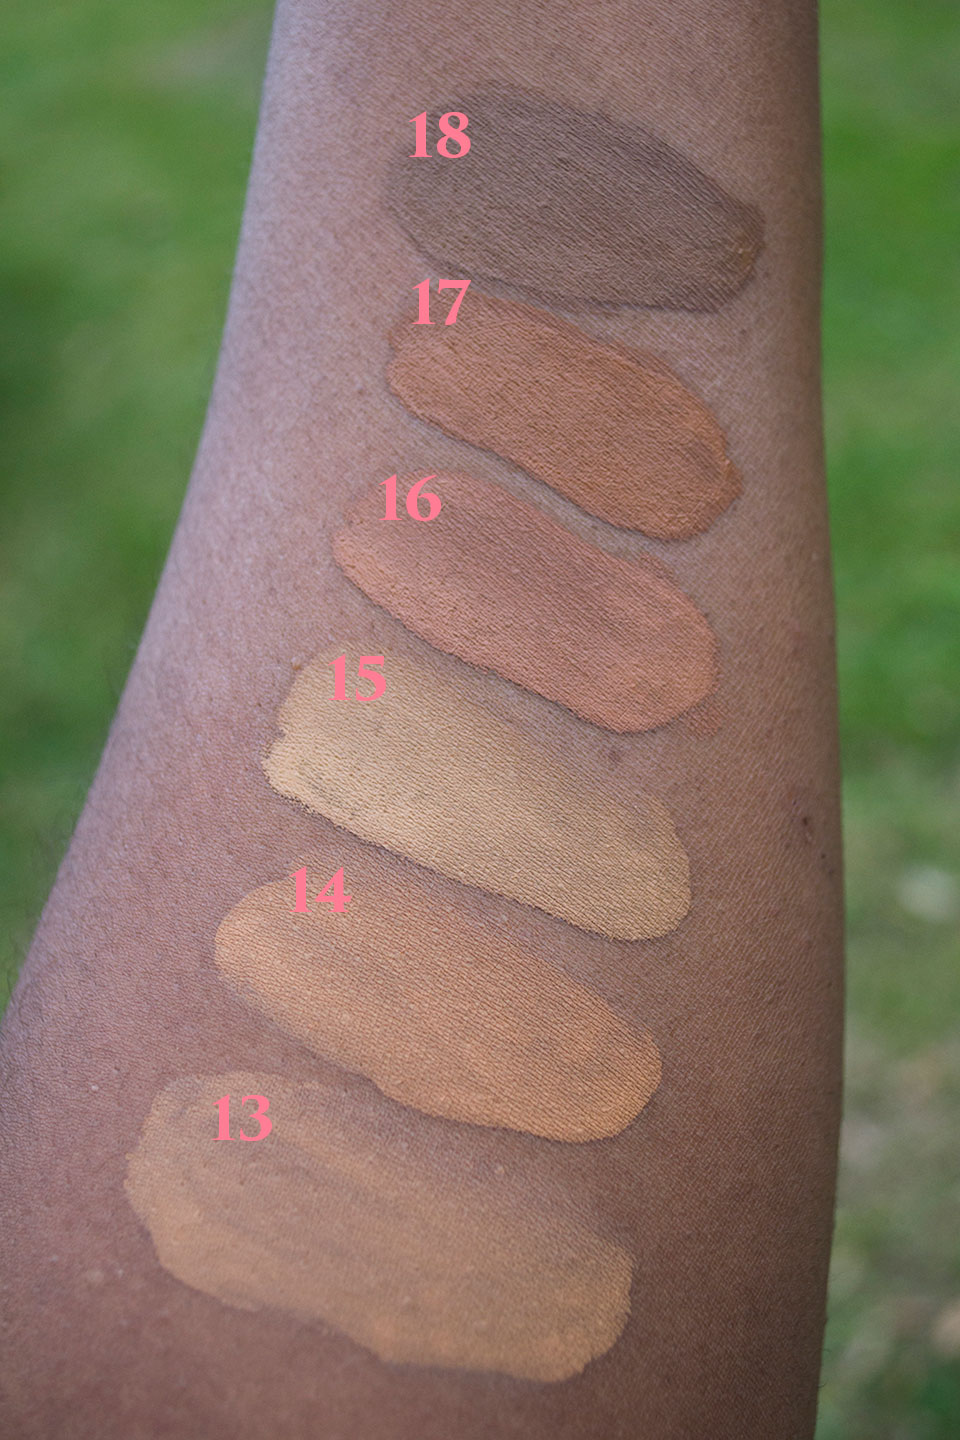 NYX Total Control Shades 13-18 - NYX Total Control Drop Foundation Swatches and Review by popular LA beauty blogger My Beauty Bunny